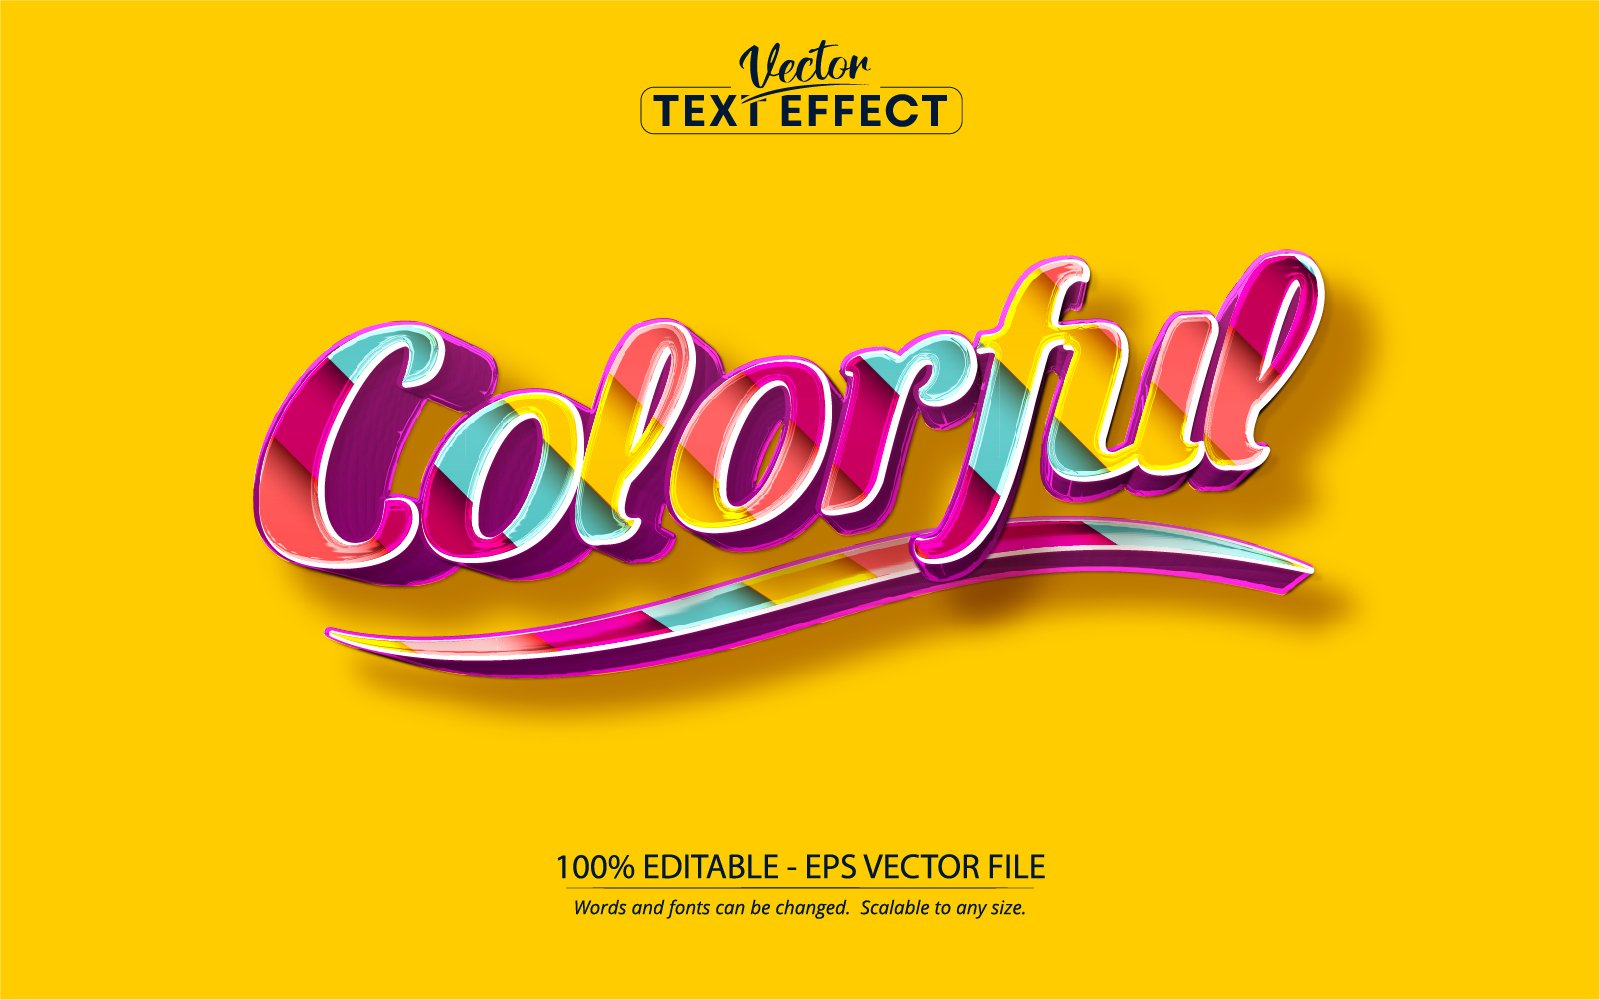 Colorful - Editable Text Effect, Comic And Multicolor Cartoon Text Style, Graphics Illustration